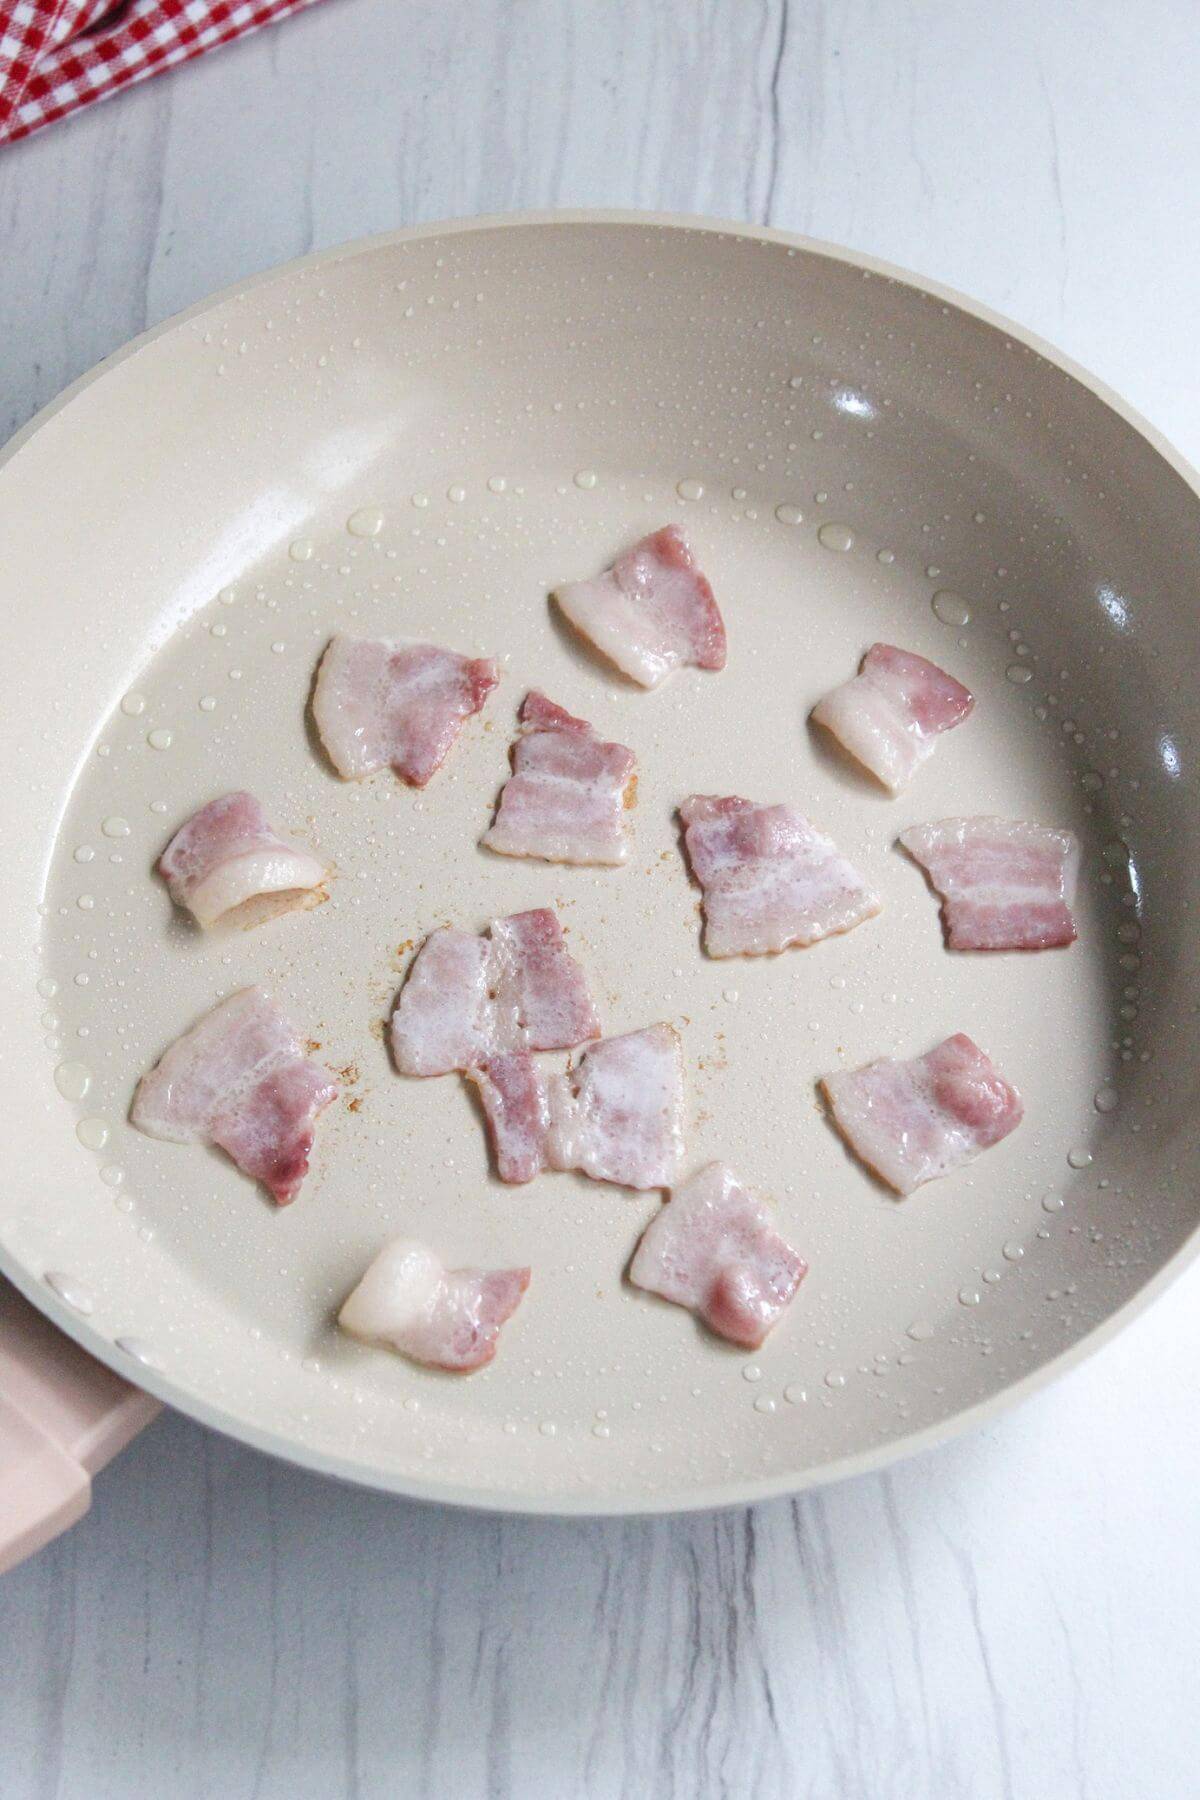 Cooking bacon pieces in skillet.